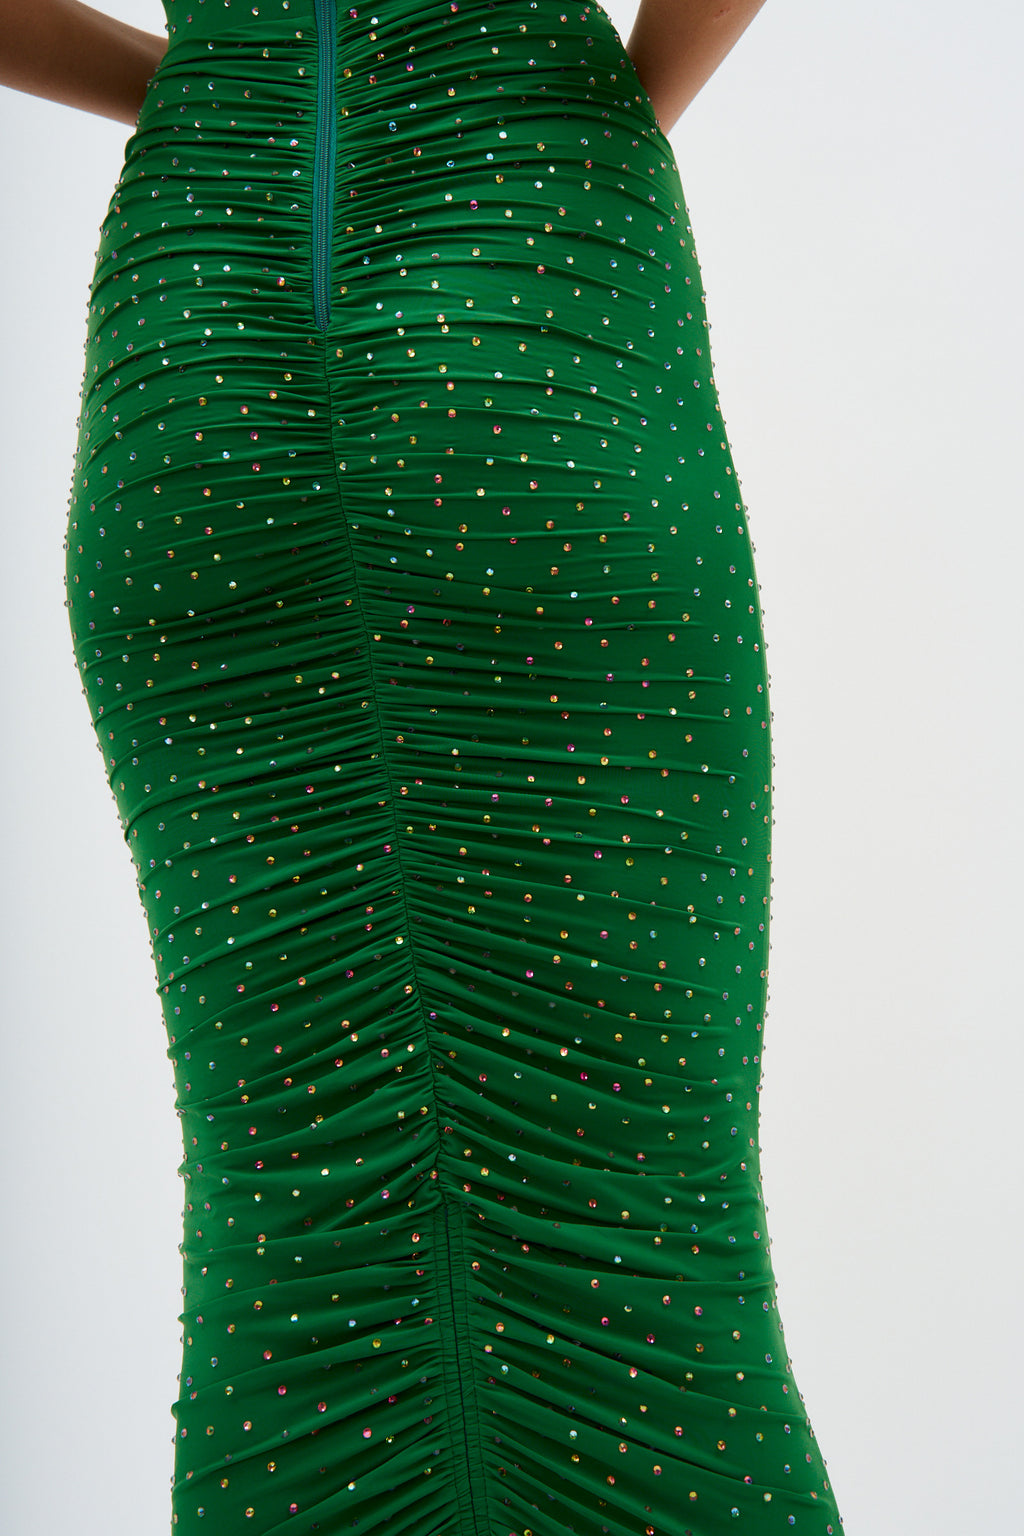 Ruched Crystal Jersey Emerald Skirt